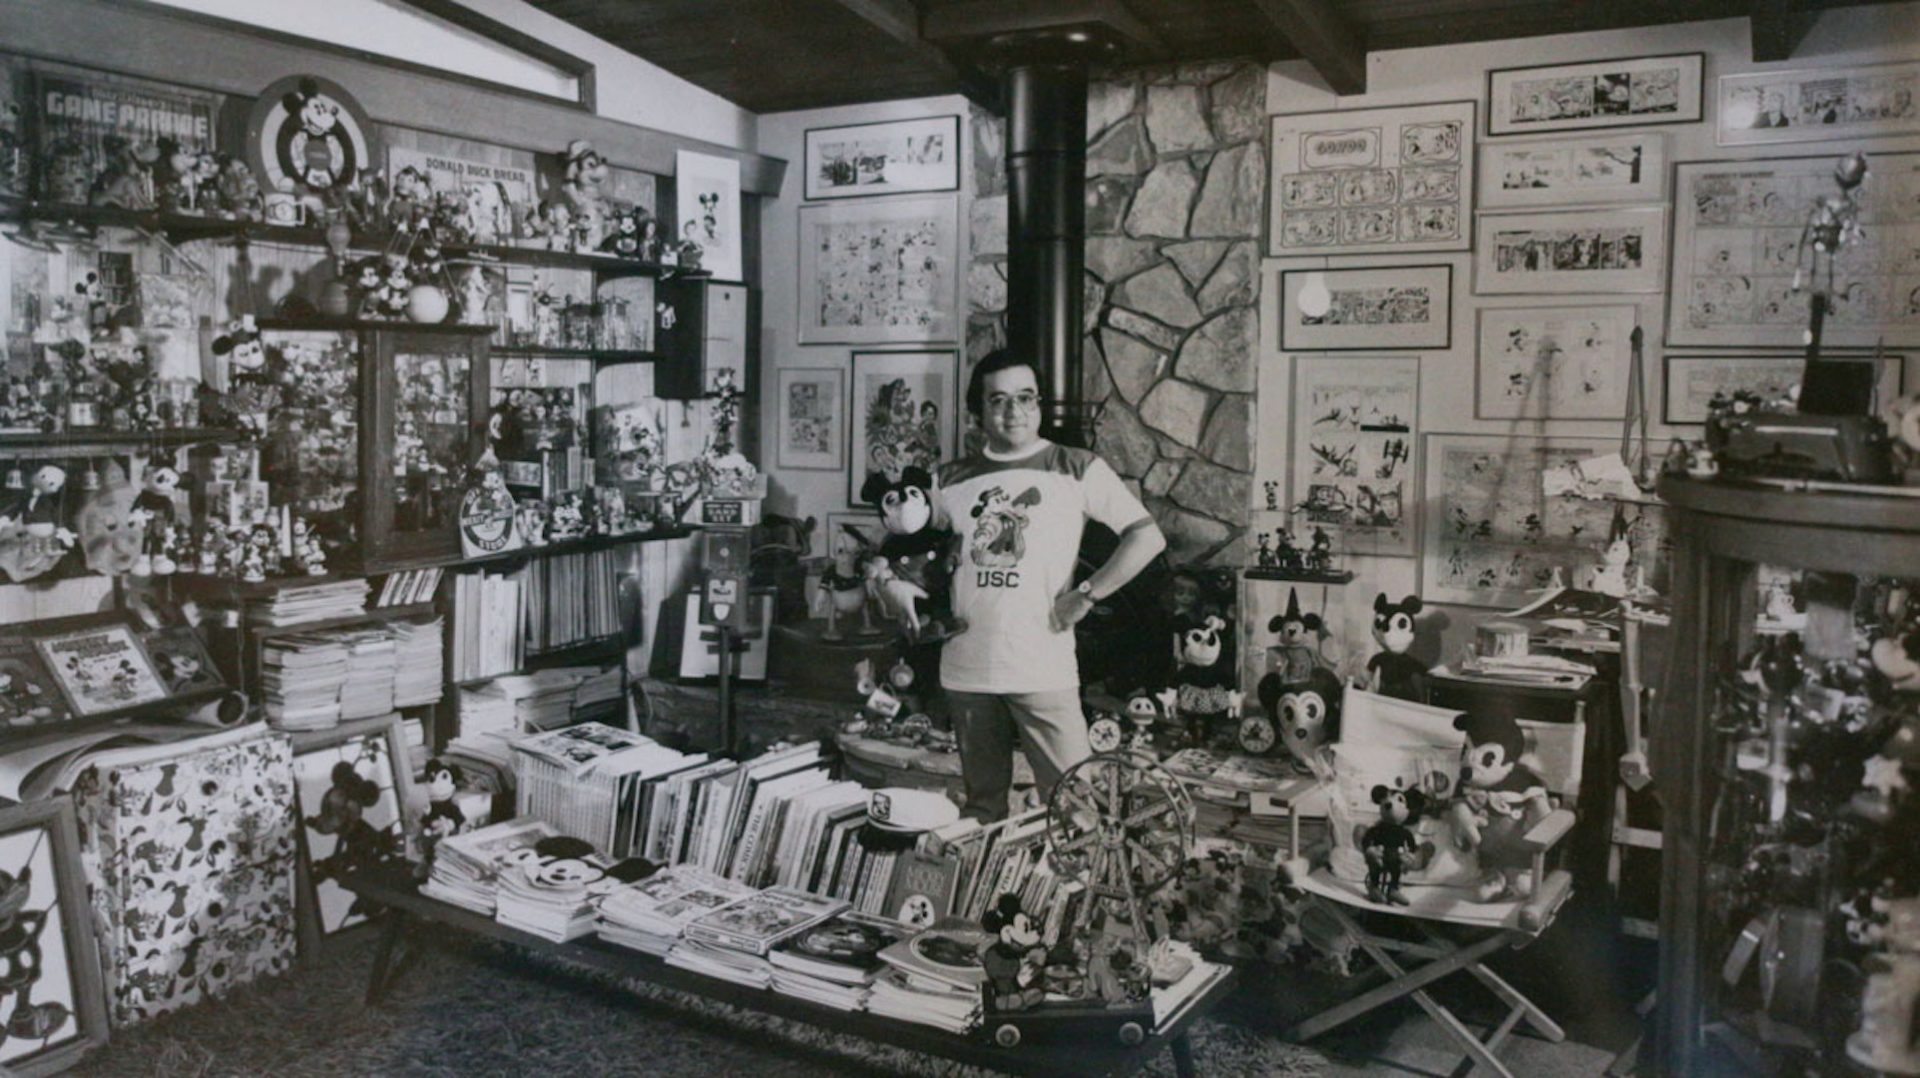 Willie Ito at his home studio in Los Angeles in the late 1970s.